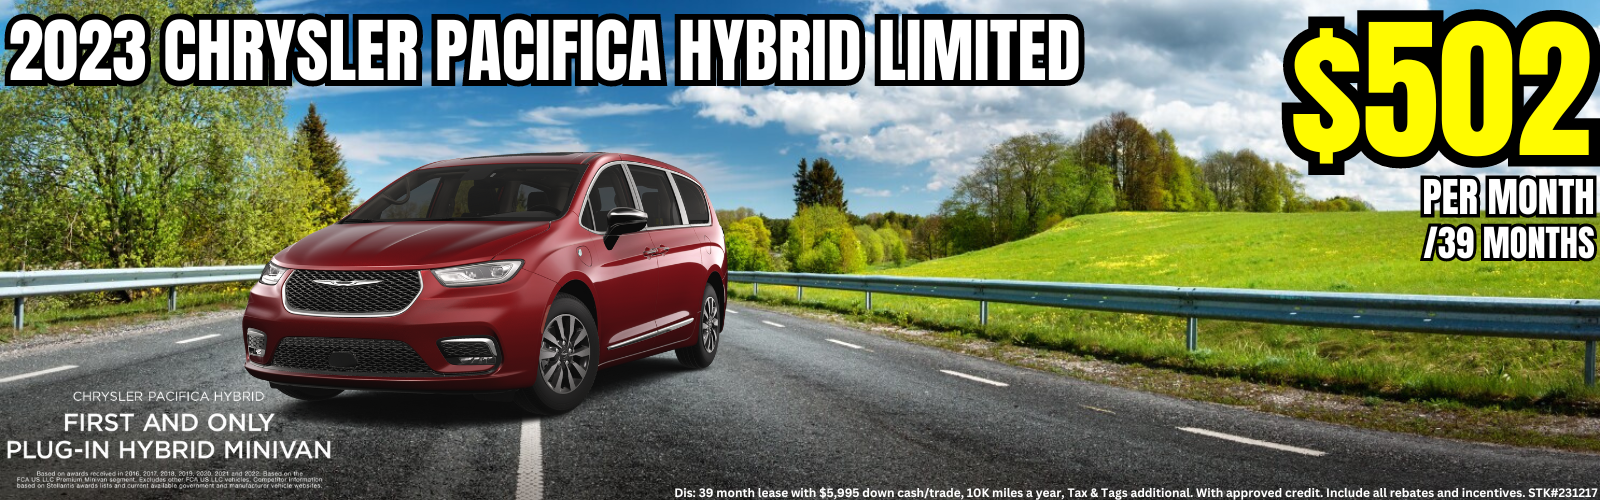 Chrysler Pacifica Hybrid Limited - Lease Special